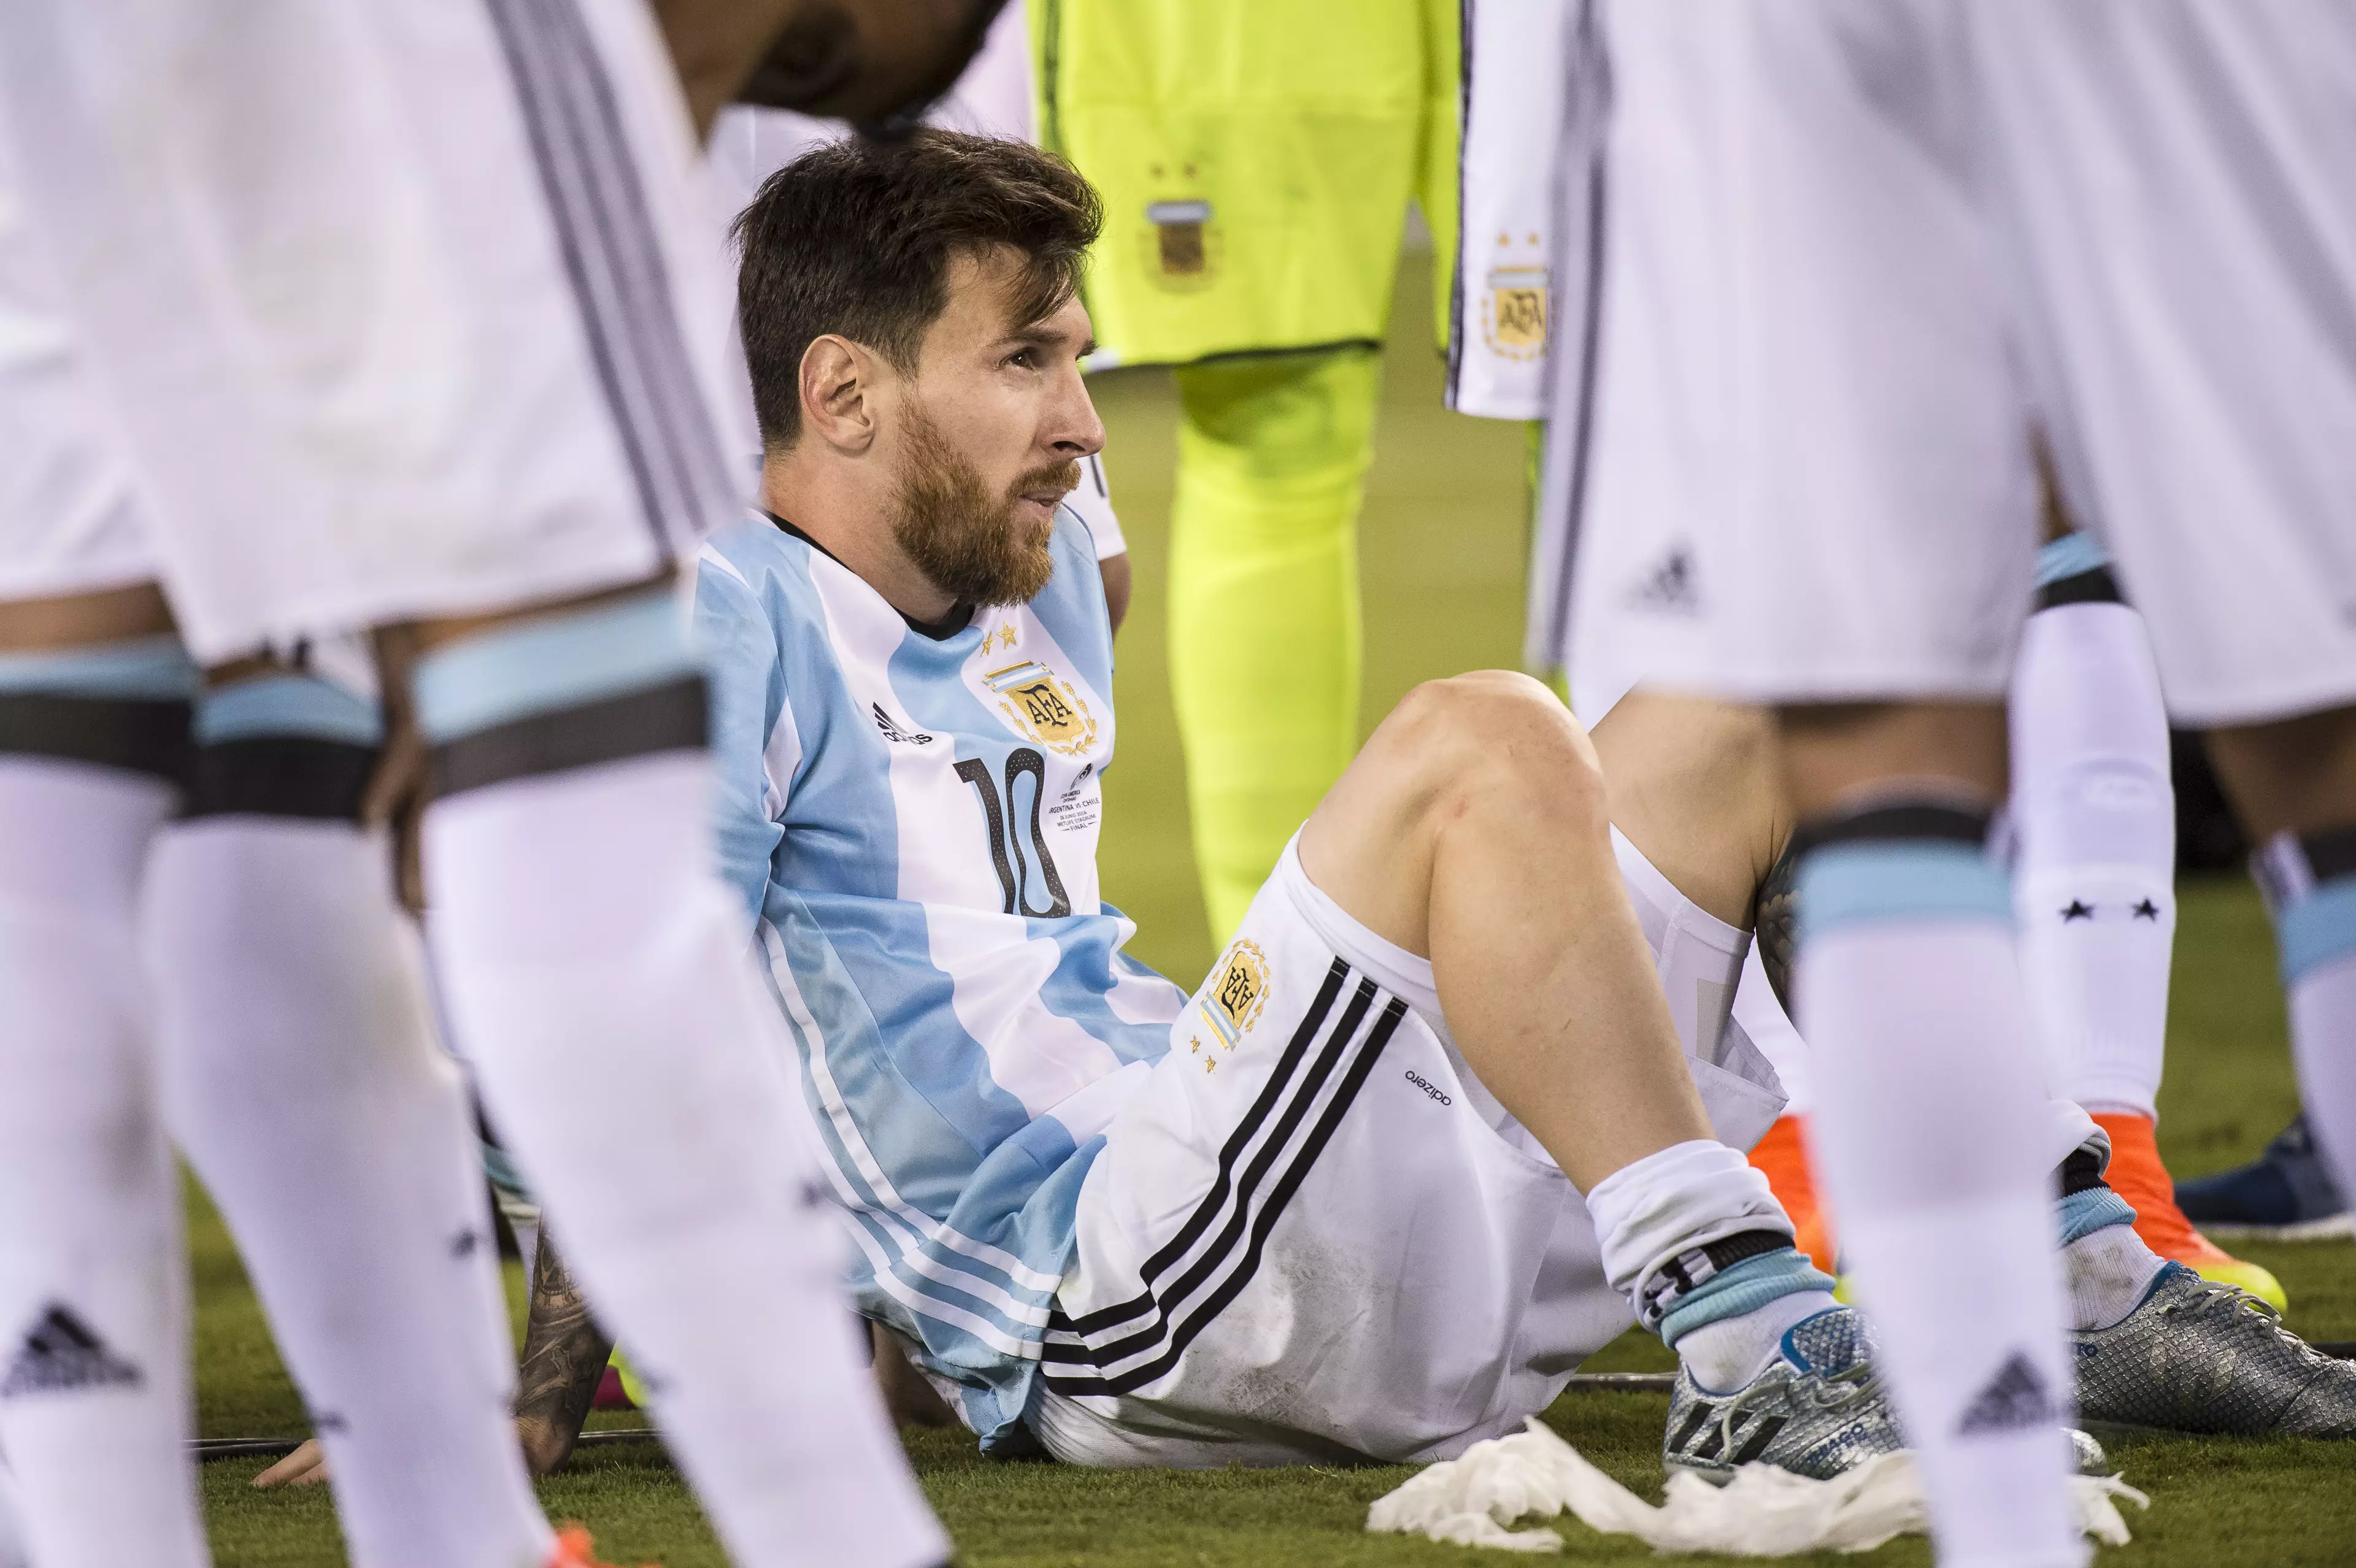 The loss to Chile really hurt Messi. Image: PA Images